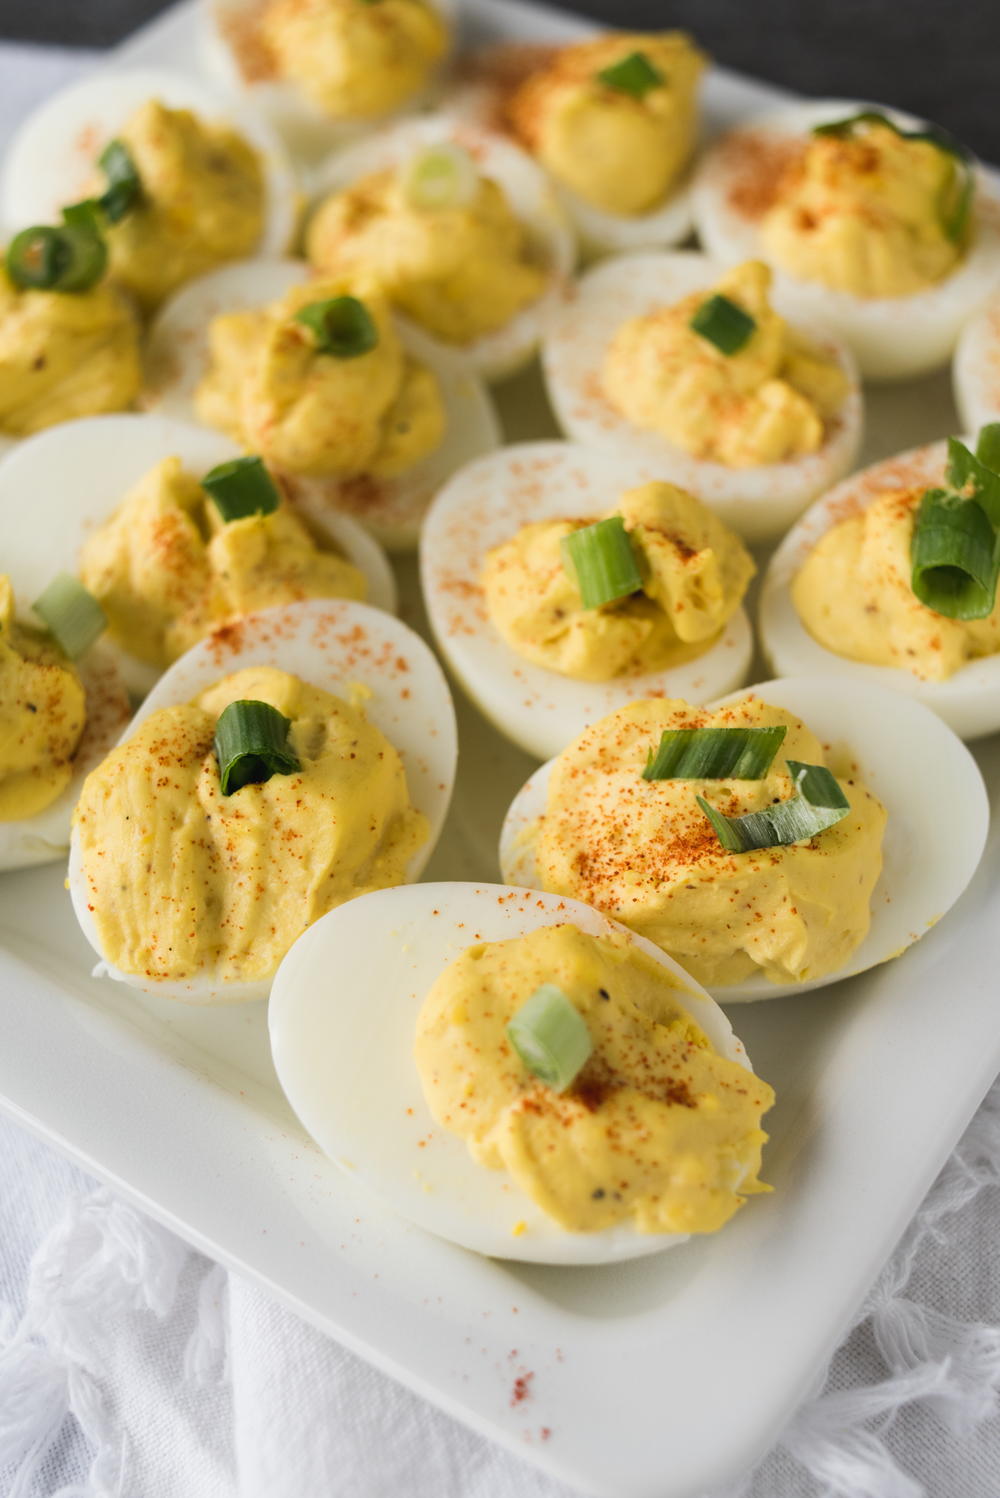 What We Learned by Deviling Eggs from Seven Different Birds